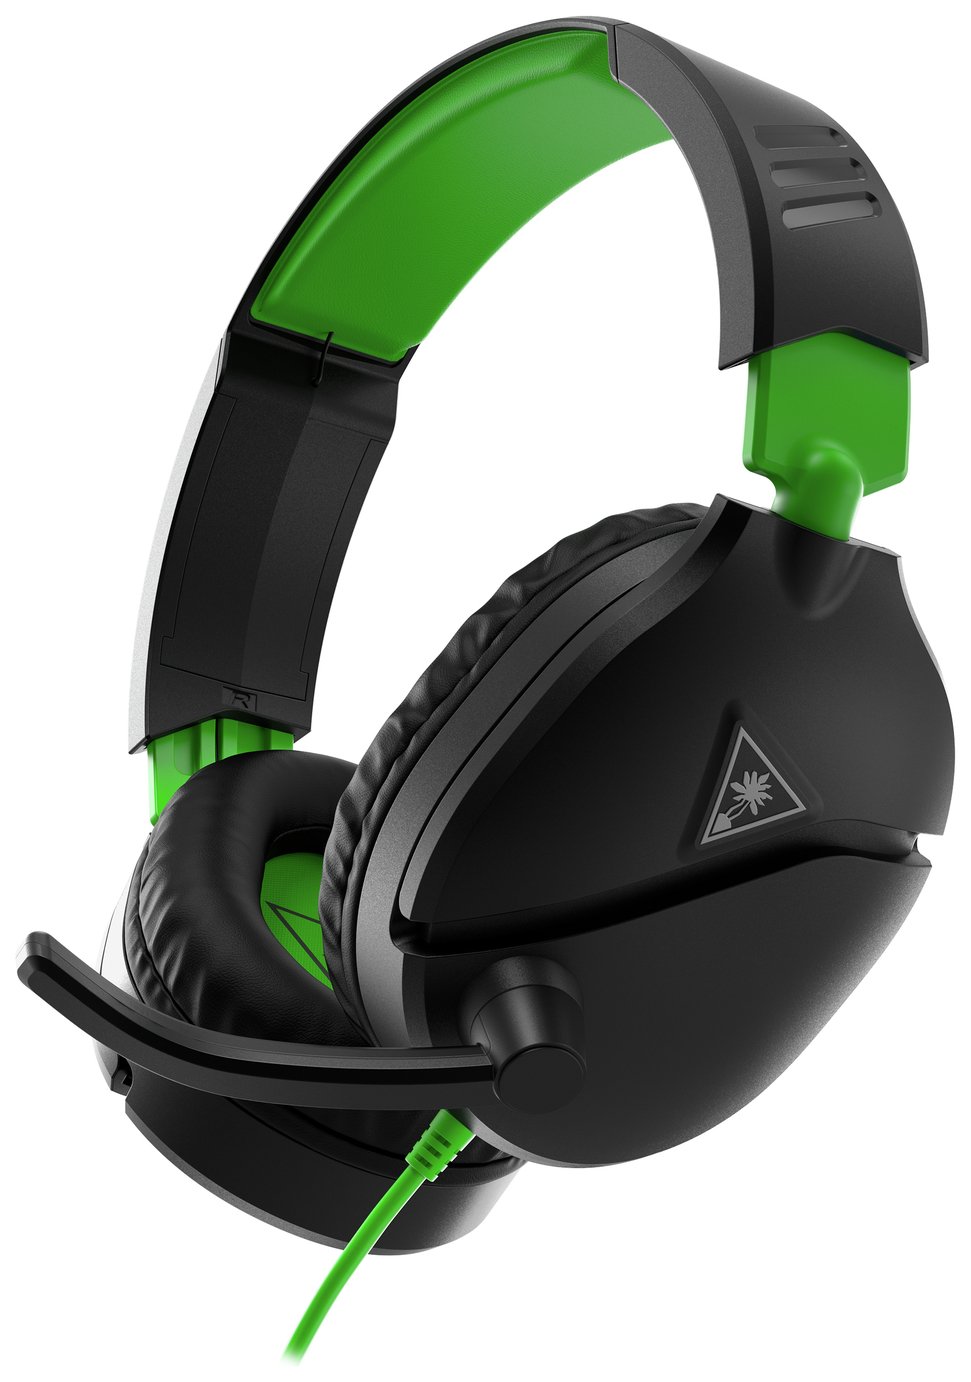 playstation headset on xbox